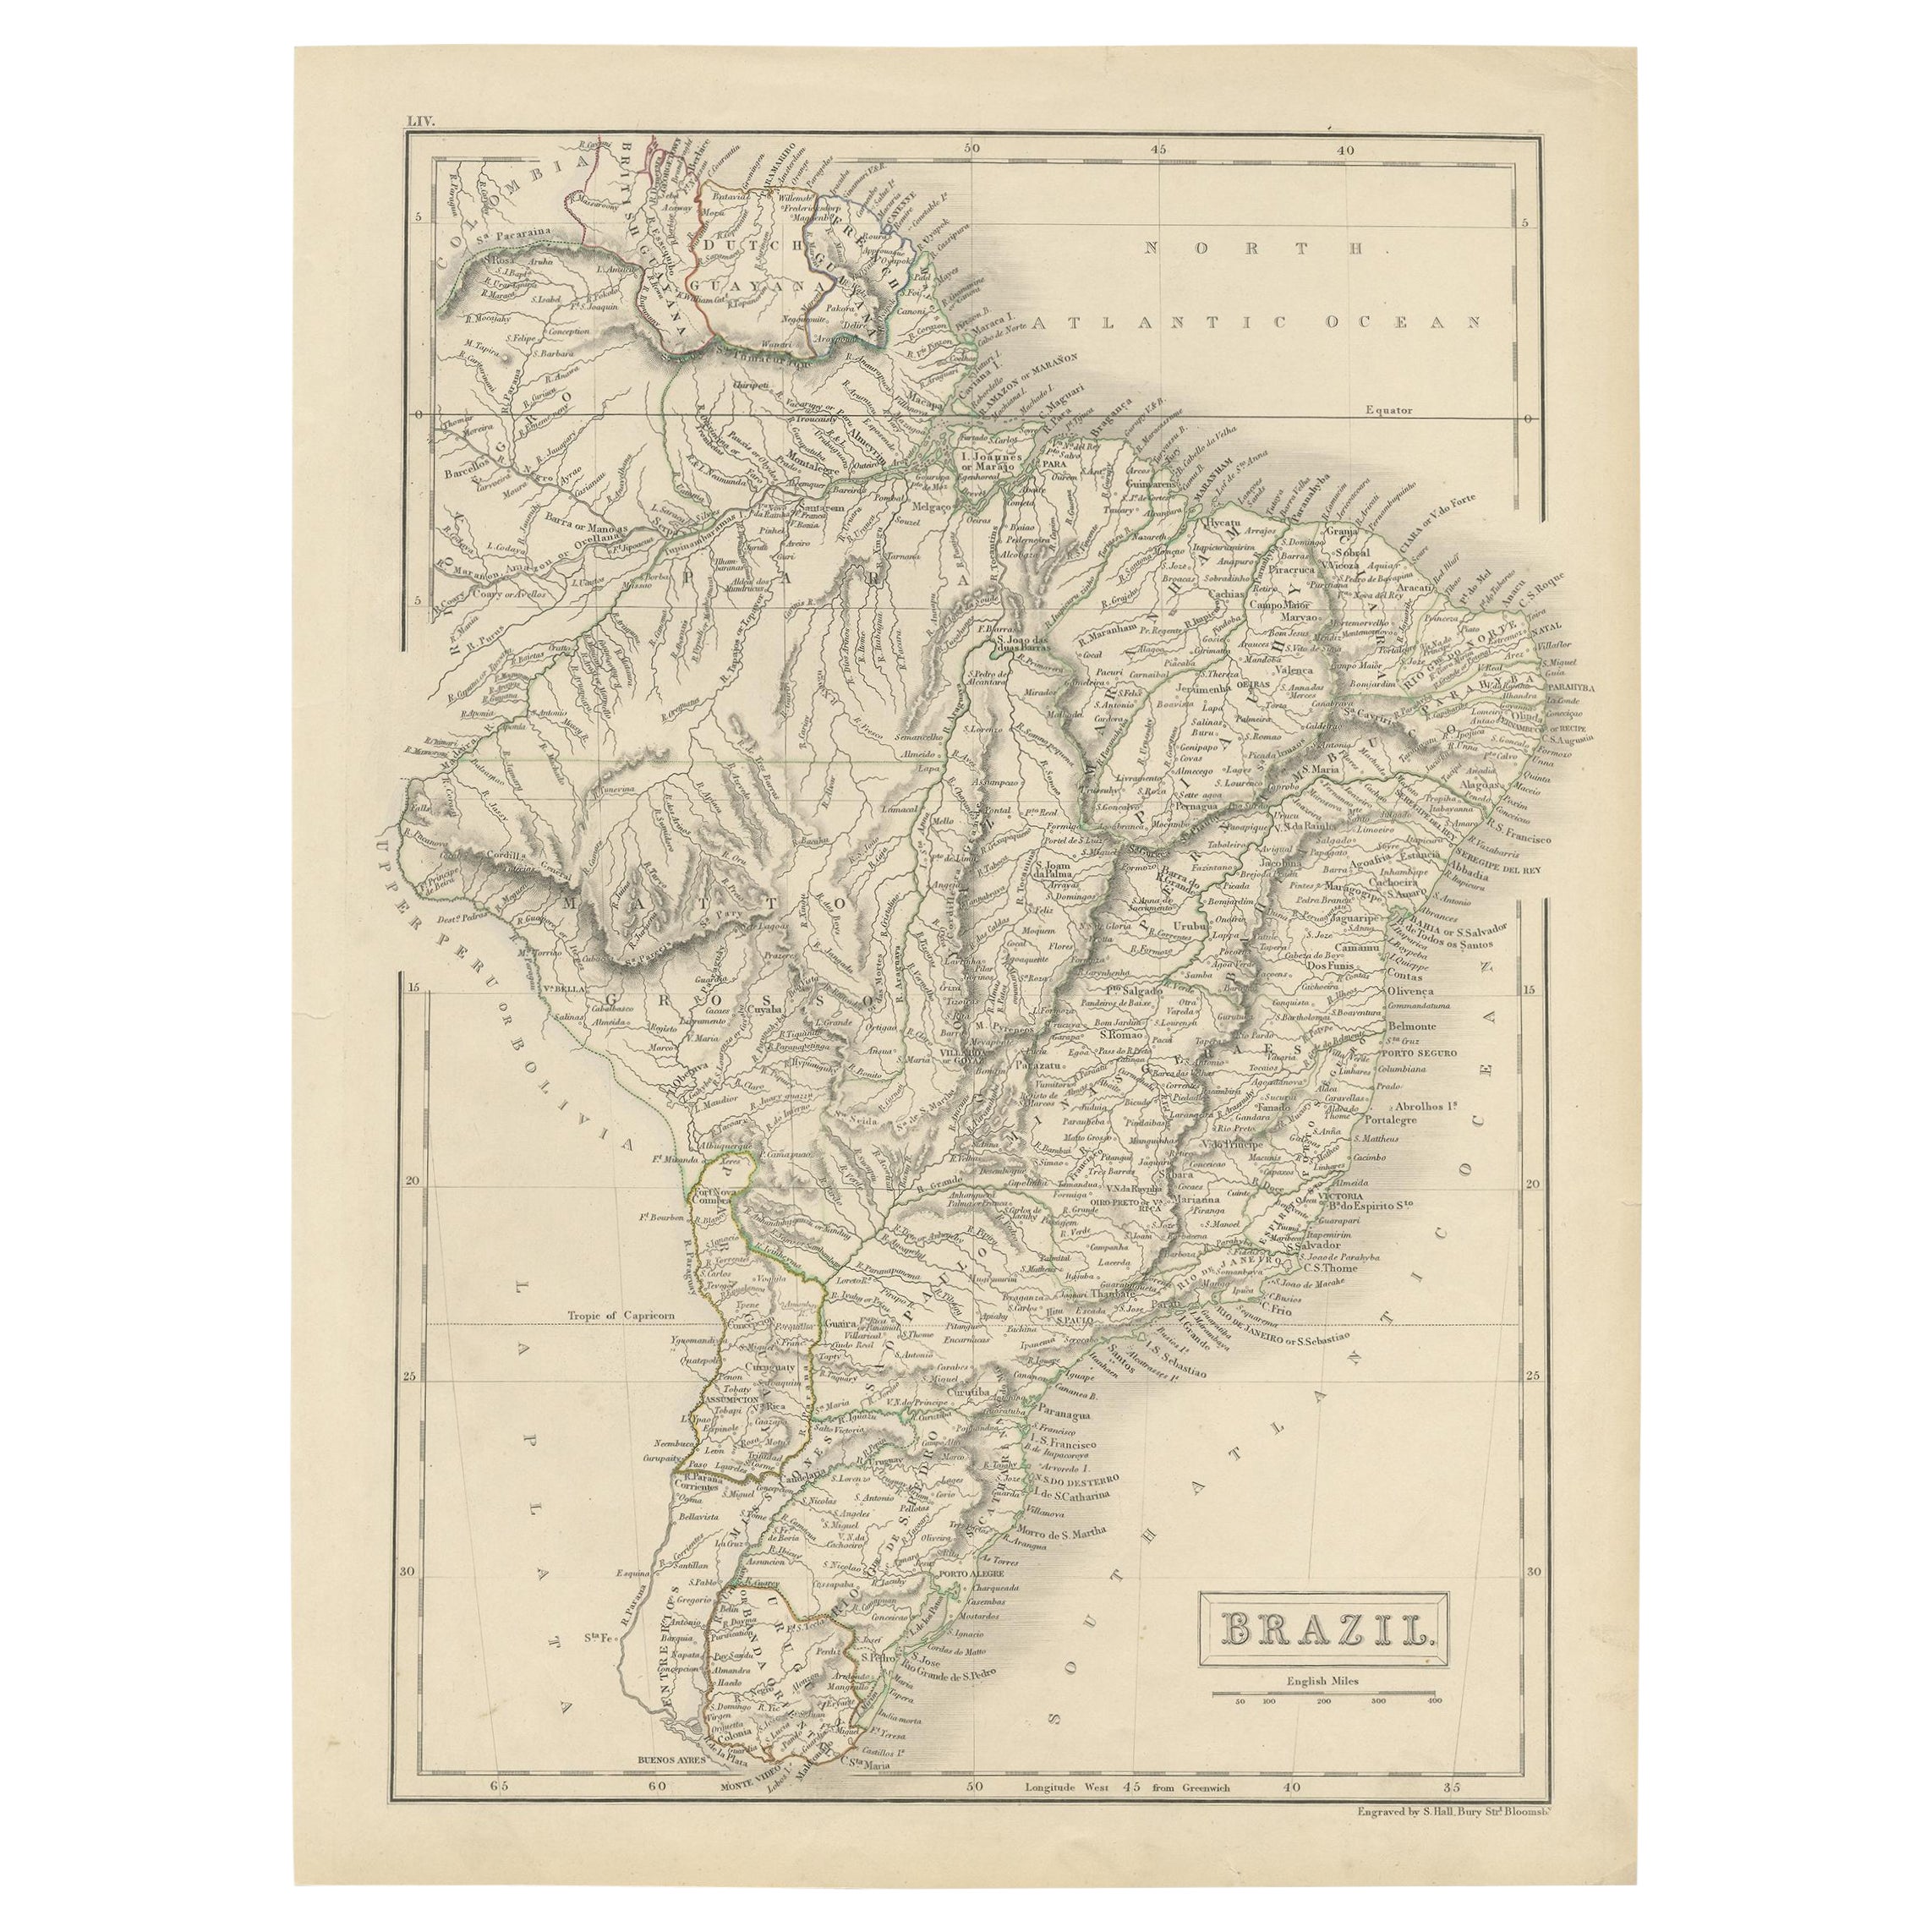 Antique Map of Brazil with Original Outline Hand-Colouring, c.1844